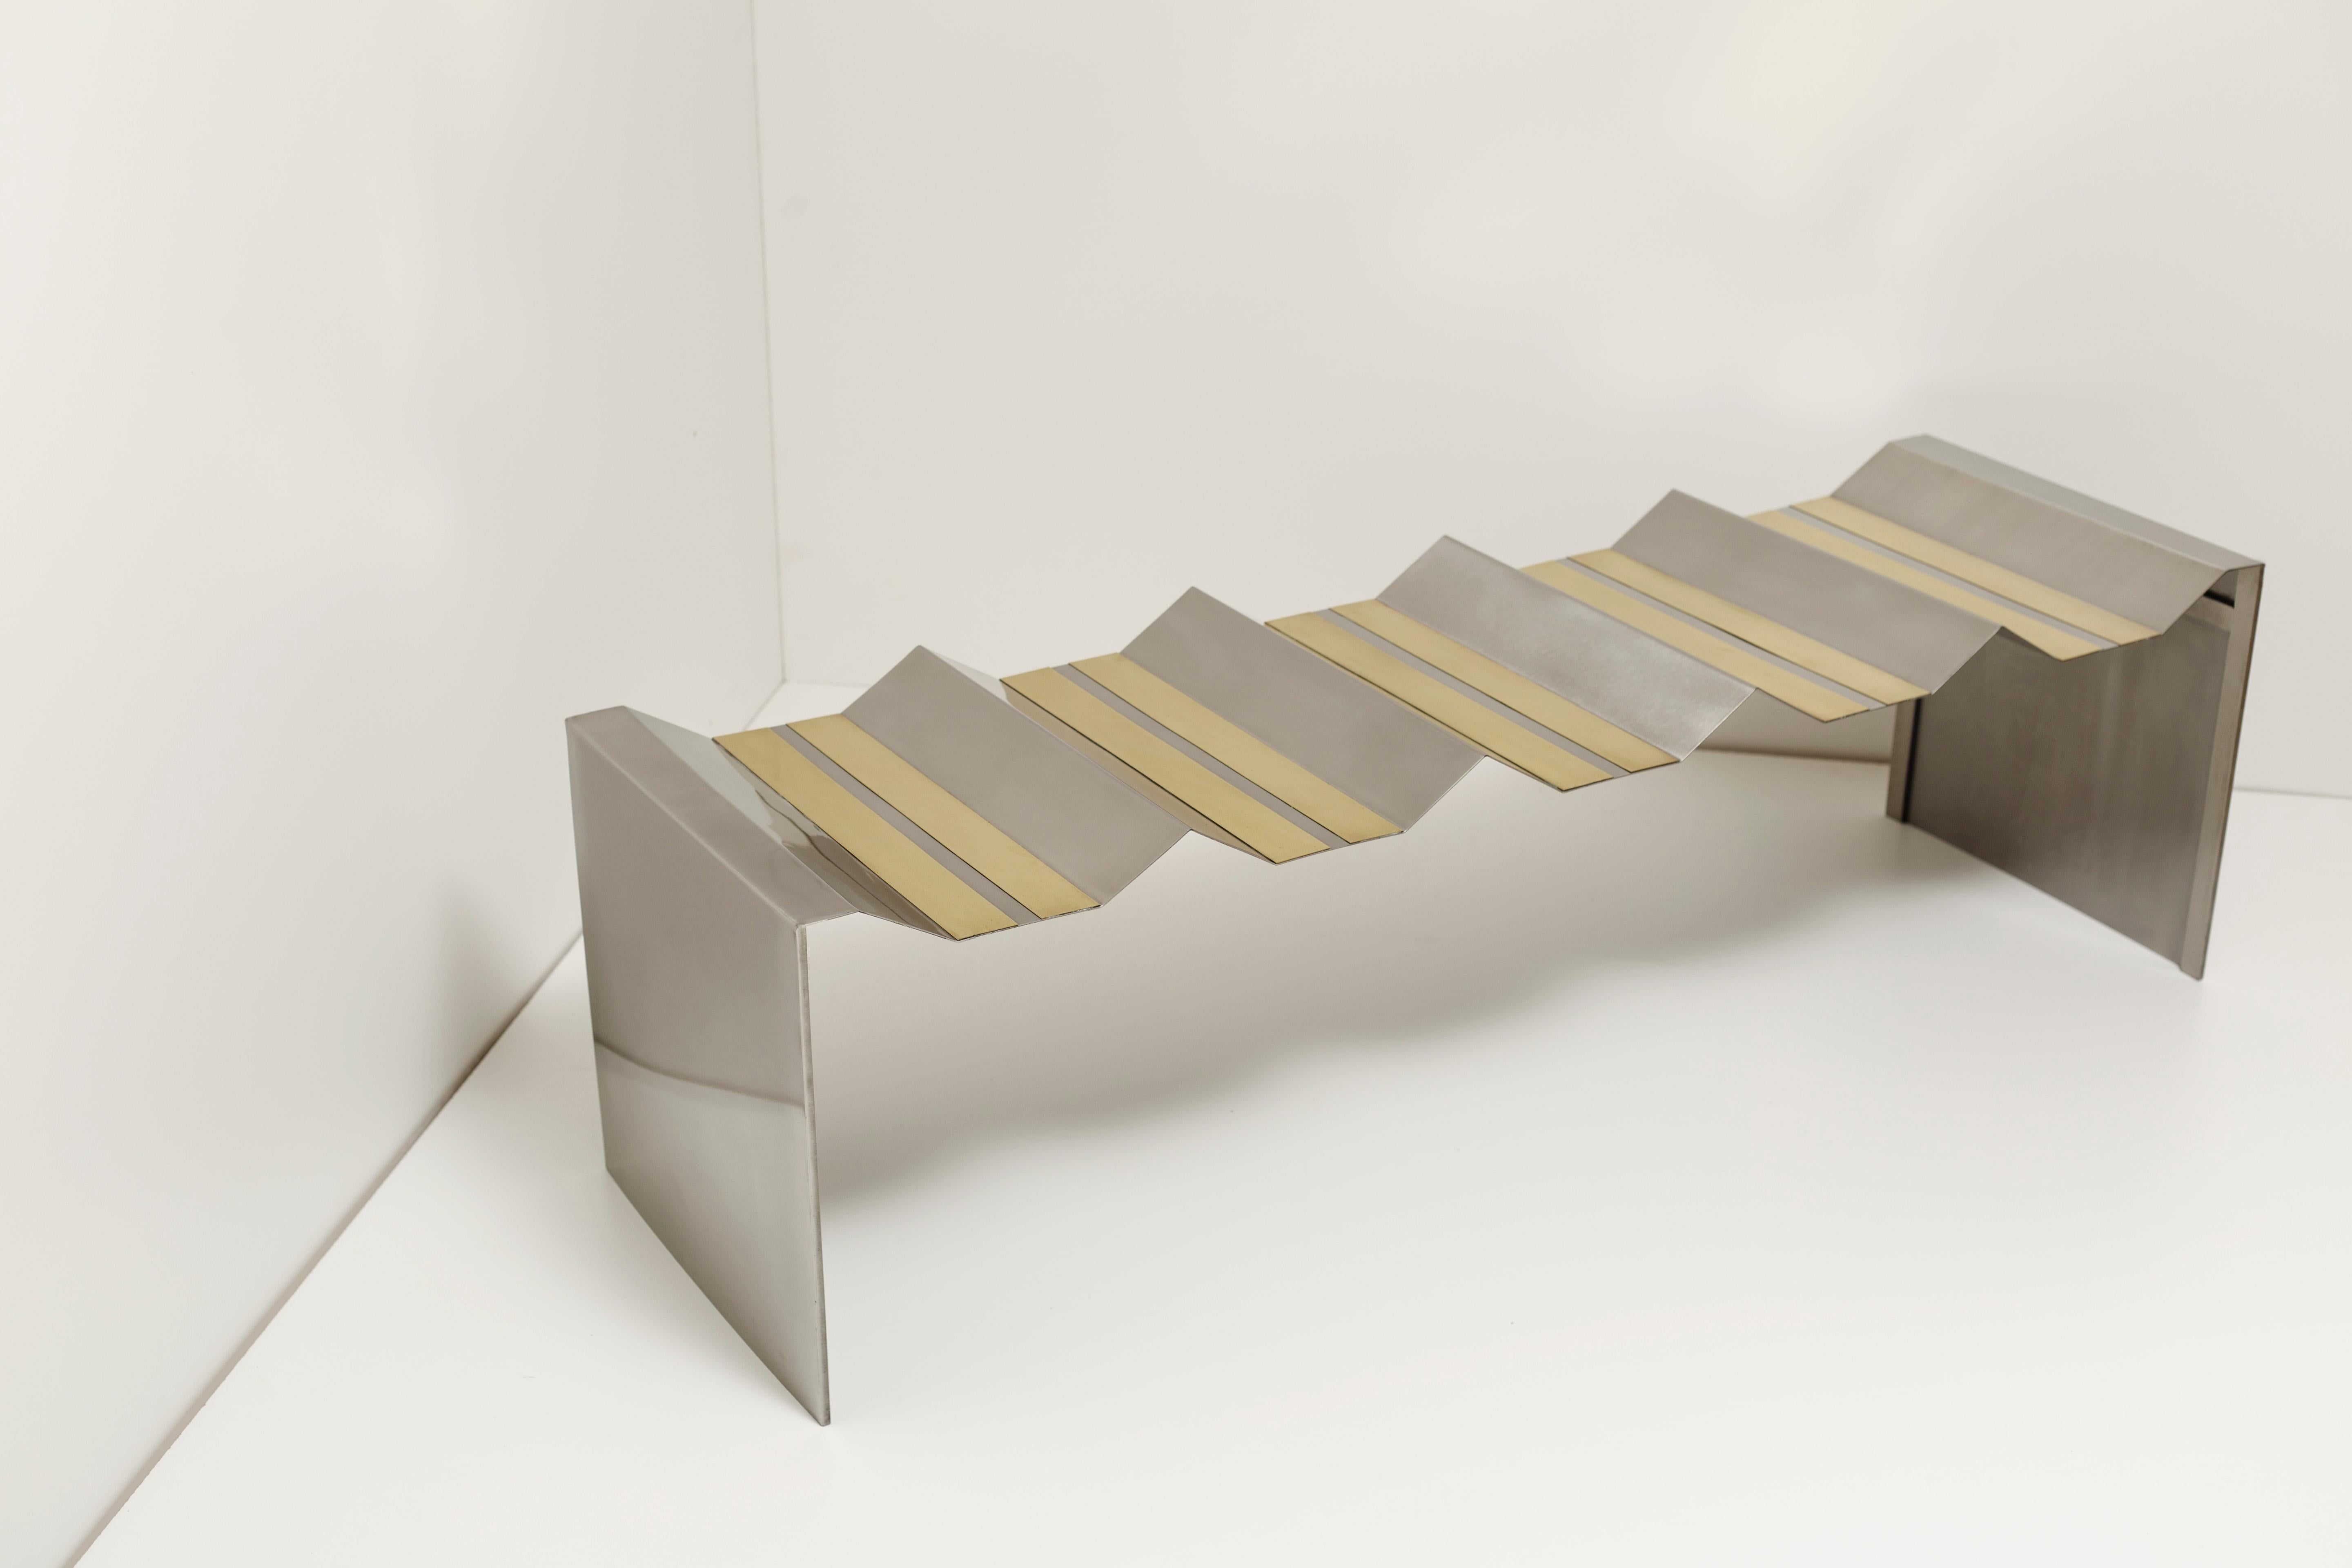 Futuristic bench by Ana Volante Studio
The Moon Collection
Dimensions: L 160 x W 50 x H 42 cm
Materials: Stainless steel and brass

Ana Volante, founder of Ana Volante Studio, is a Venezuelan designer specialized in interior environments,